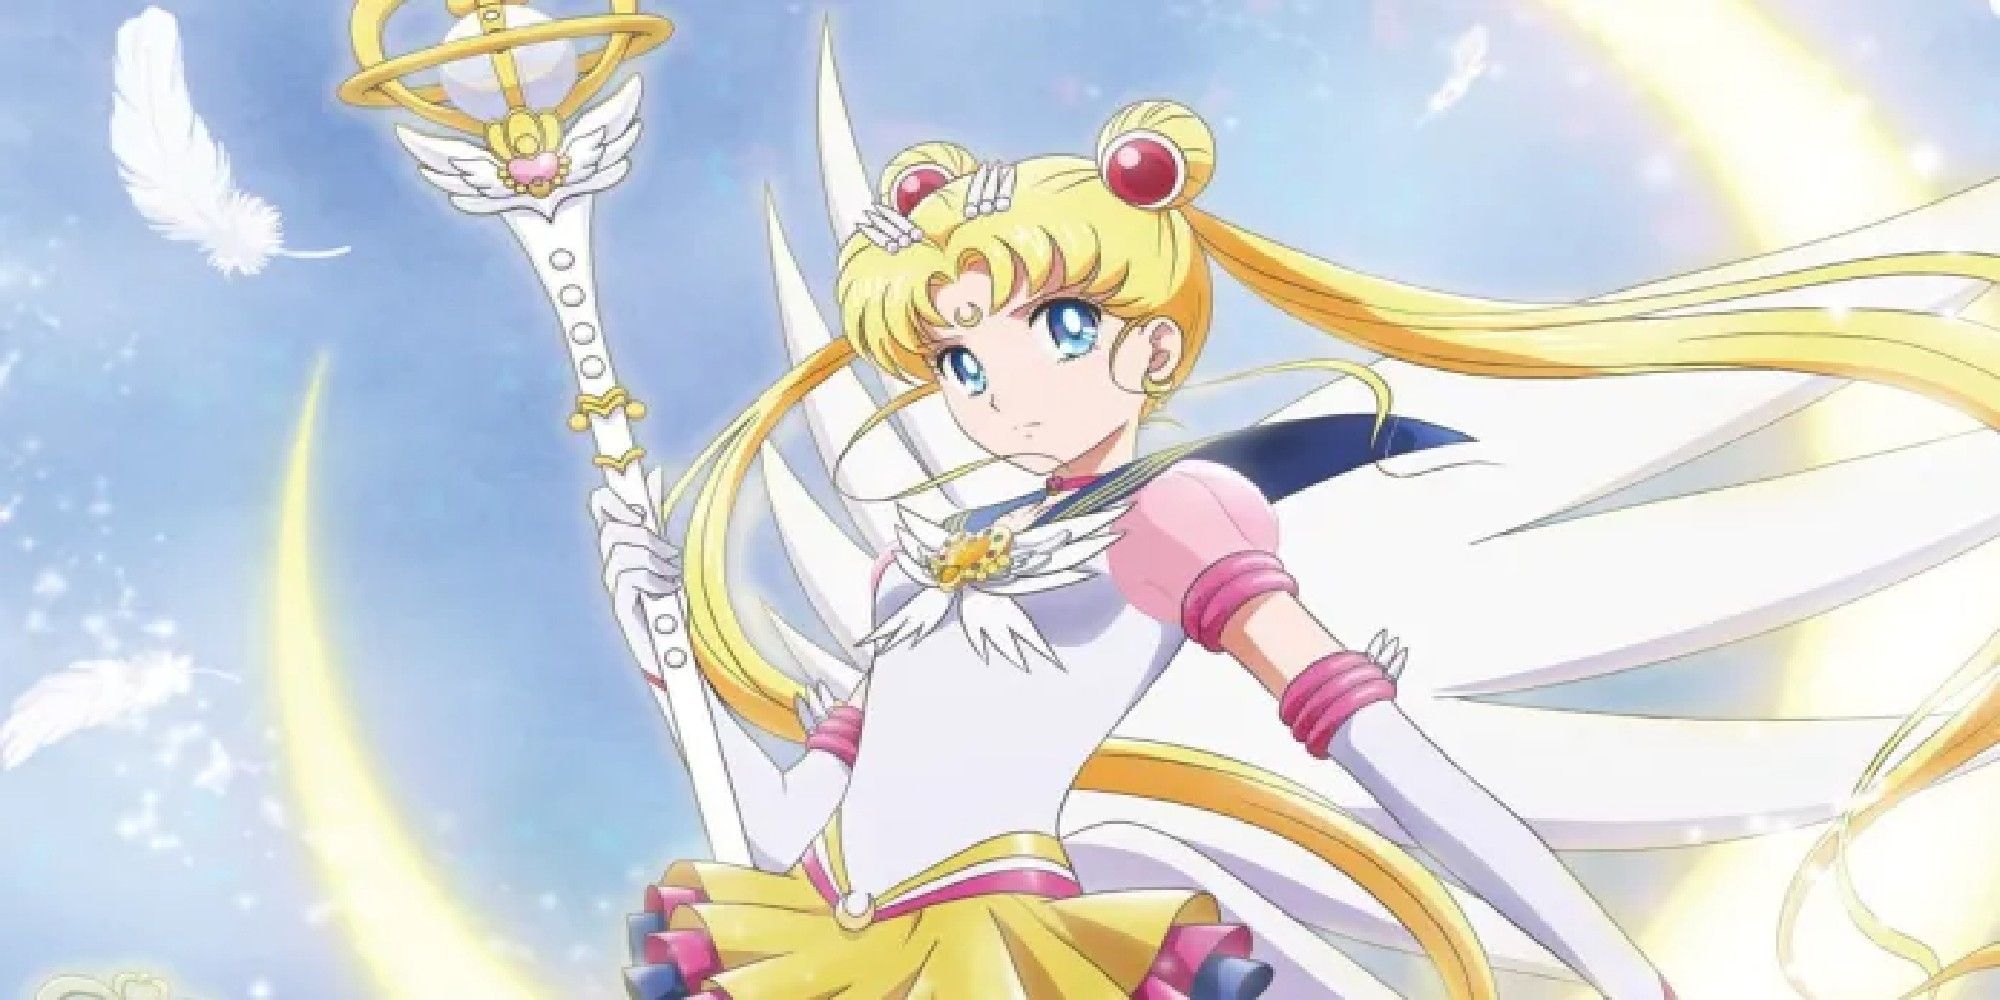 RuPaul's Drag Race's Plastique Stuns With Sailor Moon-Inspired Cosplay